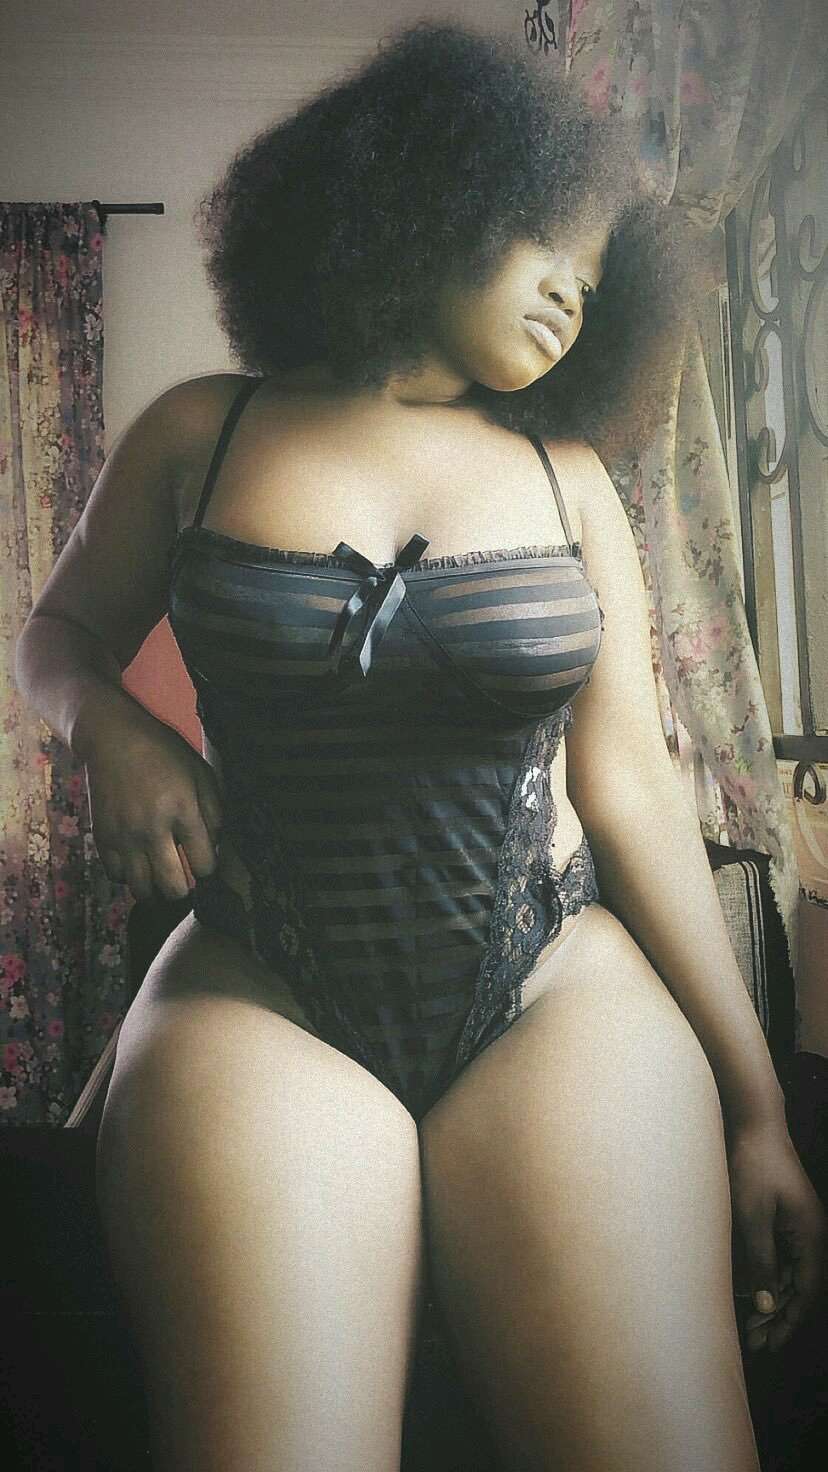 Nigeria’s Ajibola Elizabeth Crowned The Richest And Number 1 Porn Star In Africa